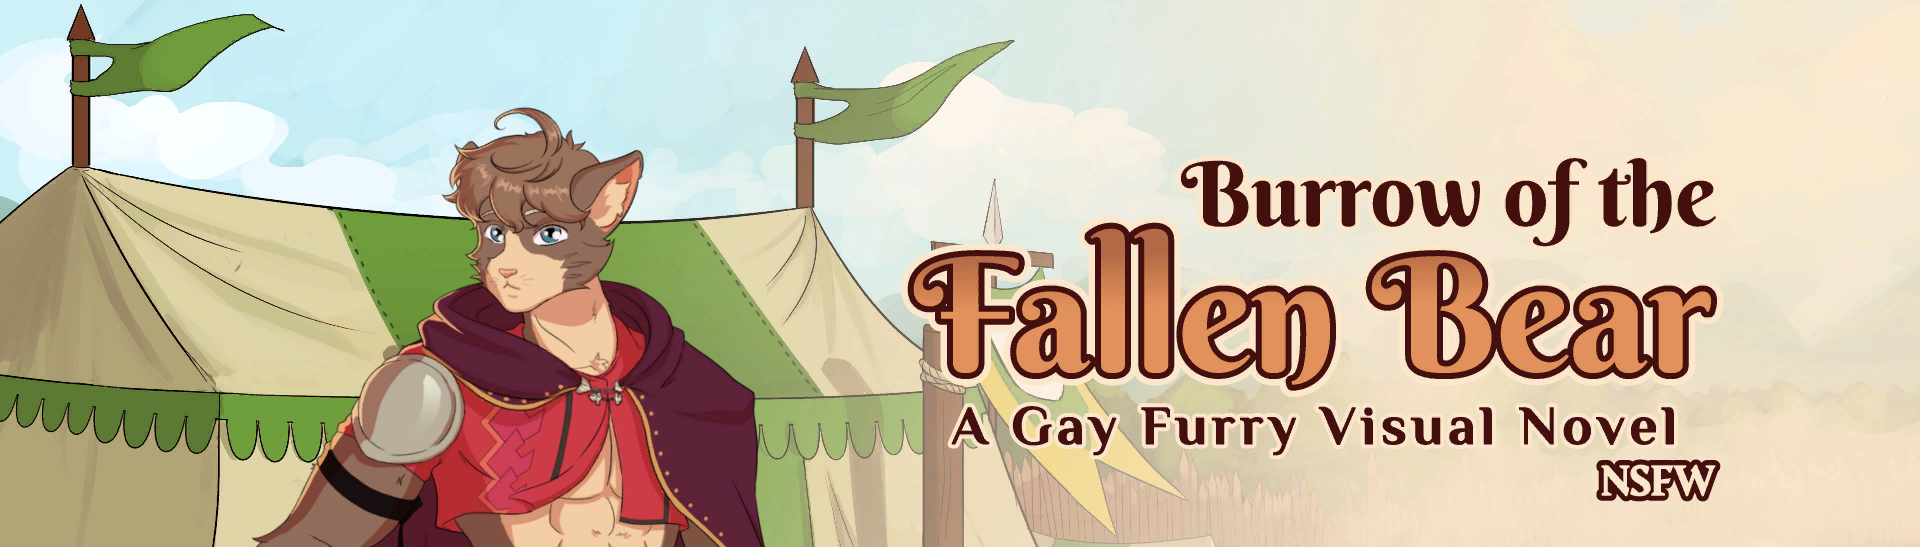 Download Burrow Of The Fallen Bear A Gay Furry Visual Novel By Male Doll Adult Game 720zoneme 1413